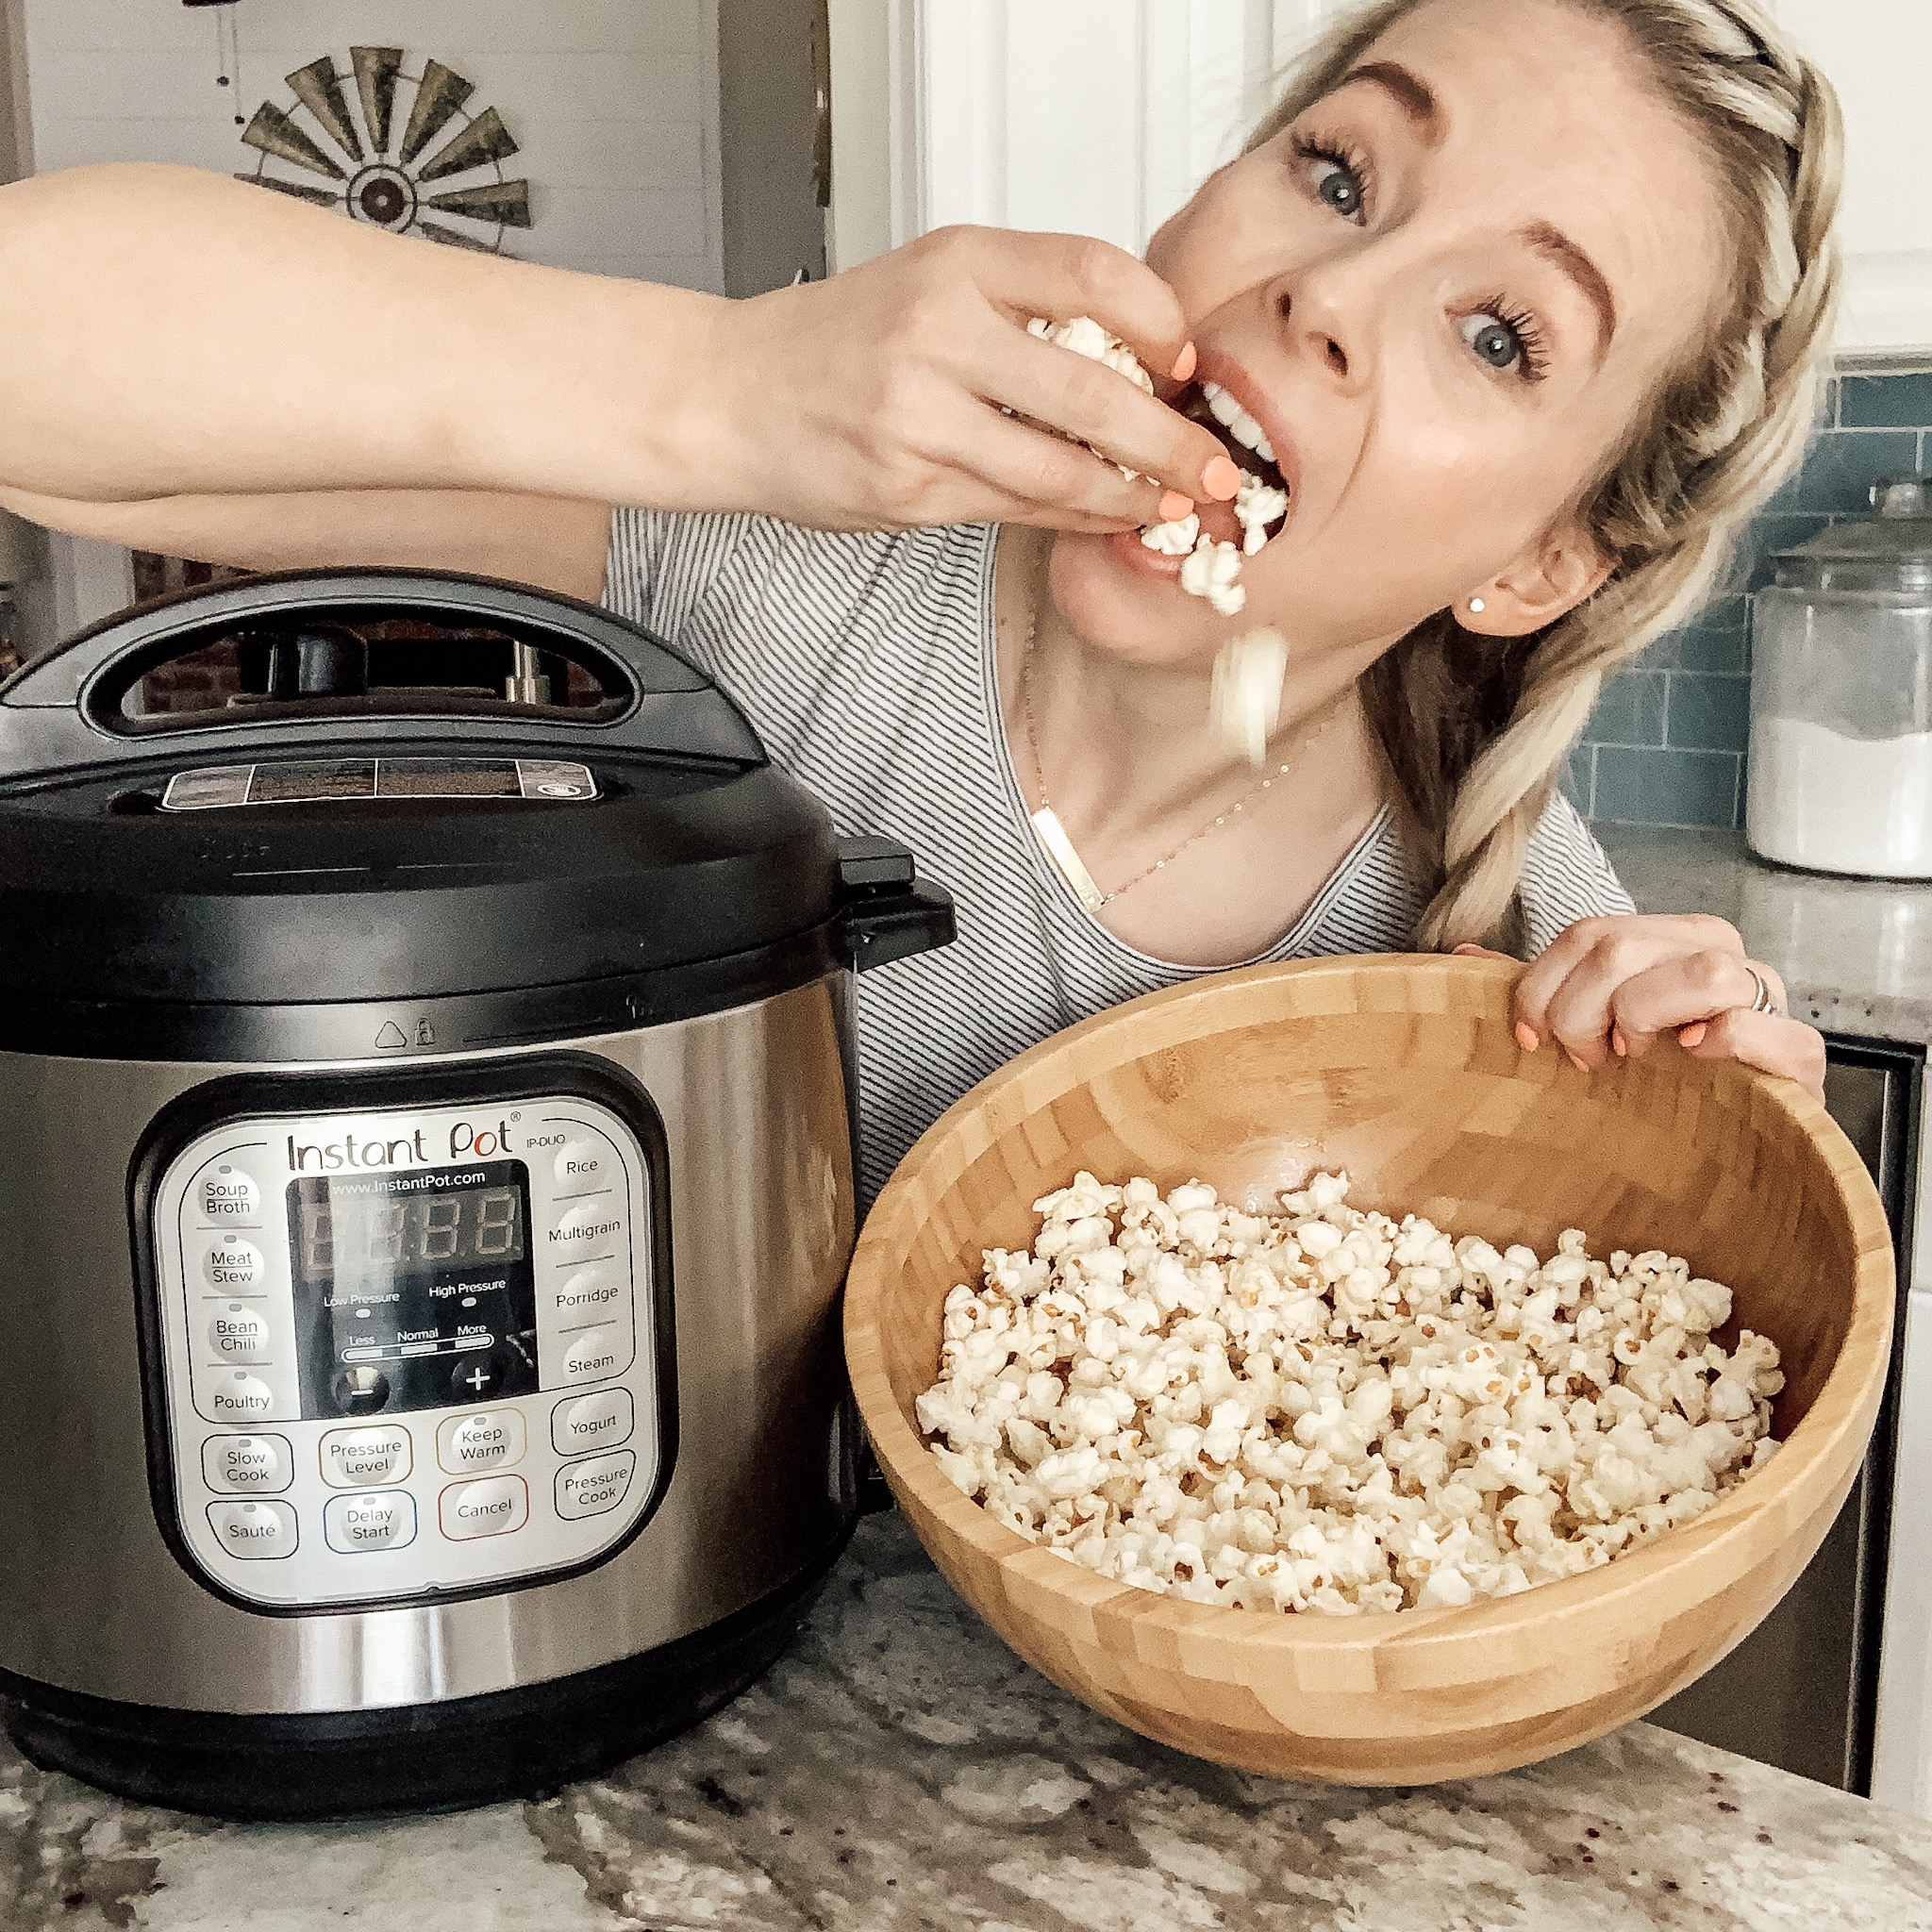 Eating popcorn from a wooden bowl with Instant Pot